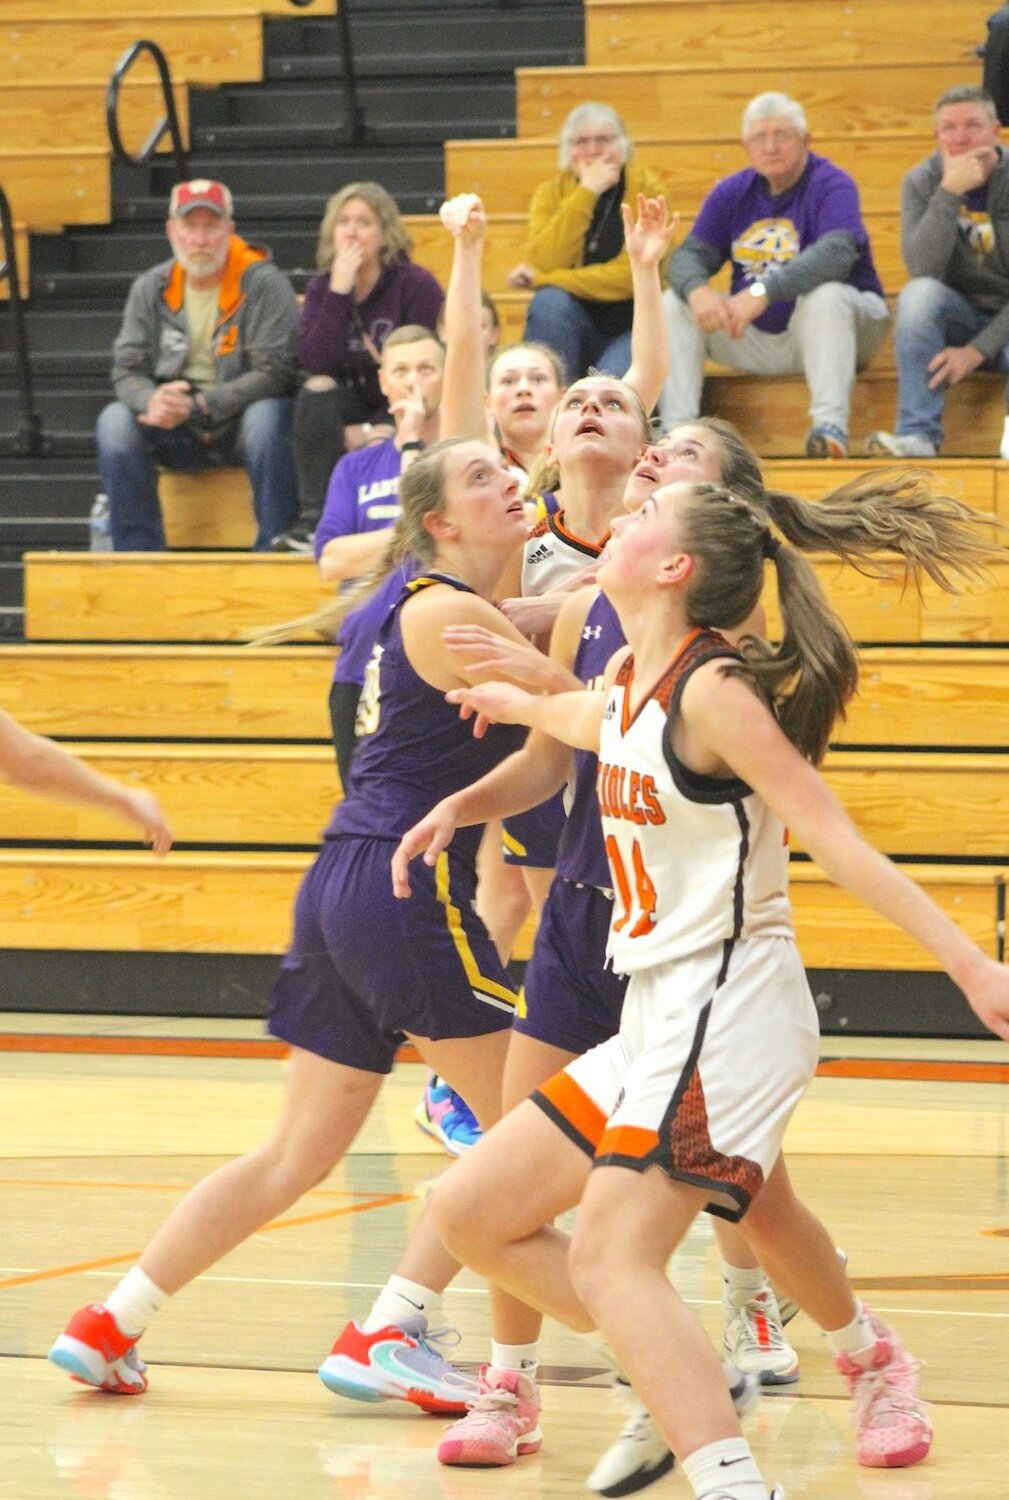 Bailey Sikora (background) makes a three point shot as teammates Syleen Seichter (middle) and Aliyah Allard (front) await the rebound Nov. 21 at home.